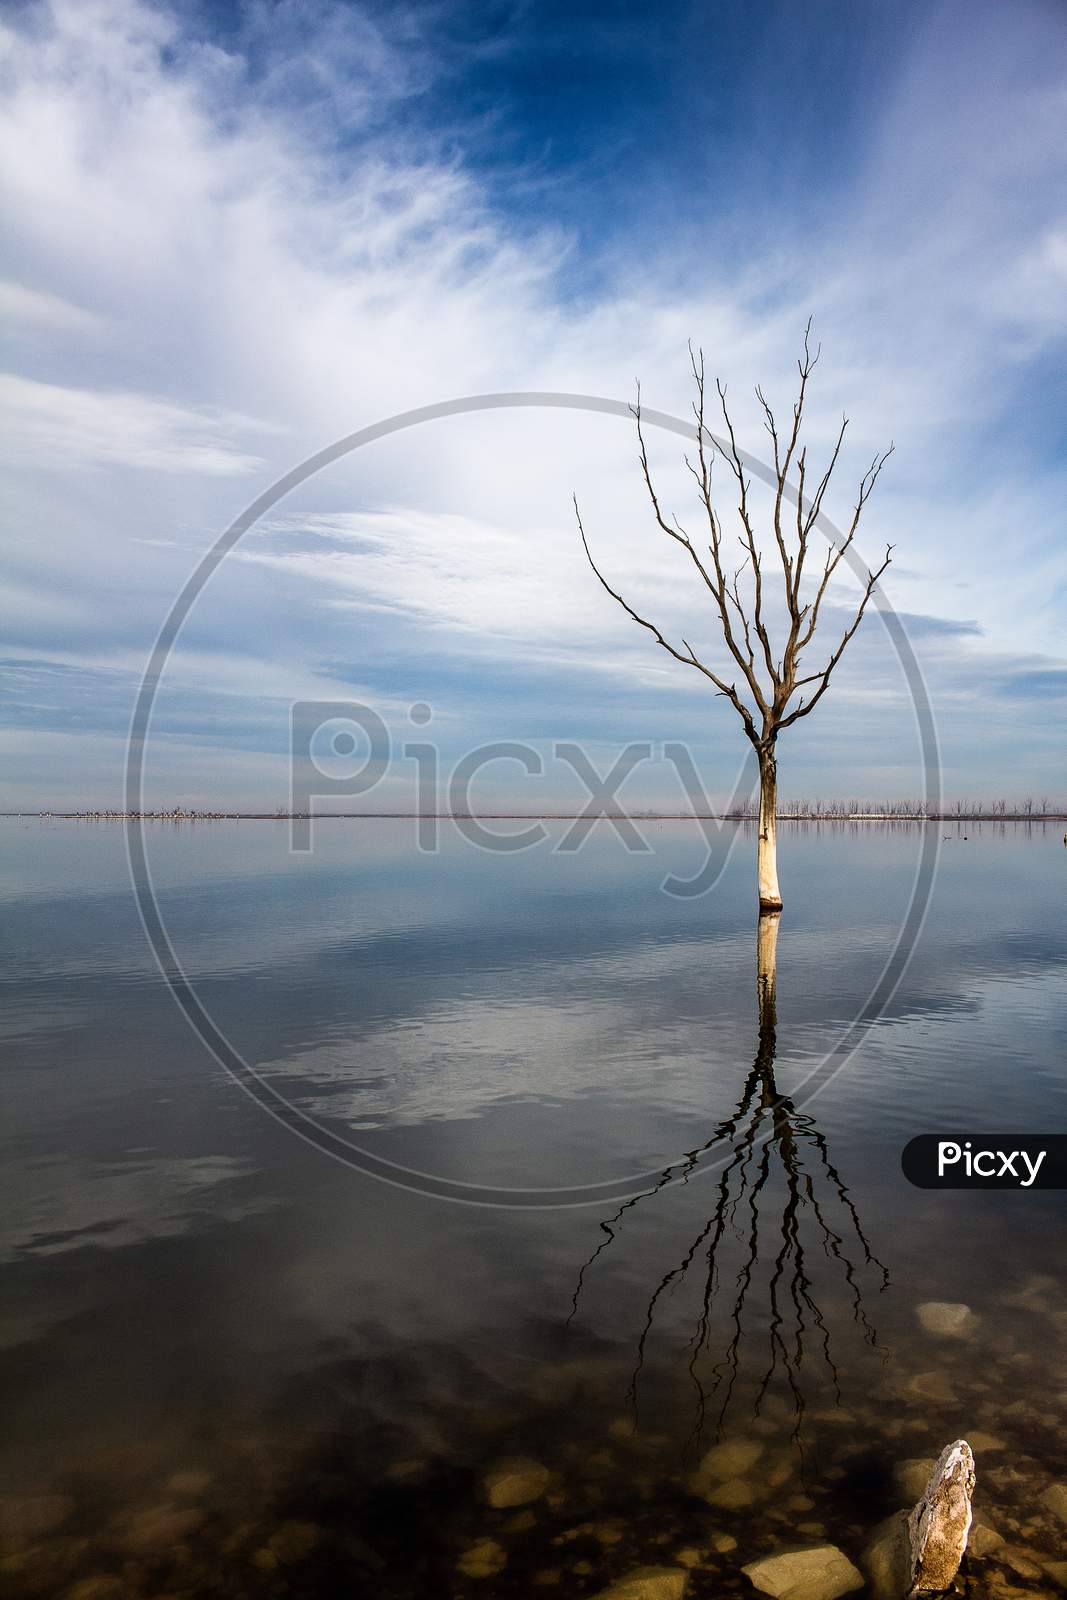 Dry Tree Submerged In The Lake.